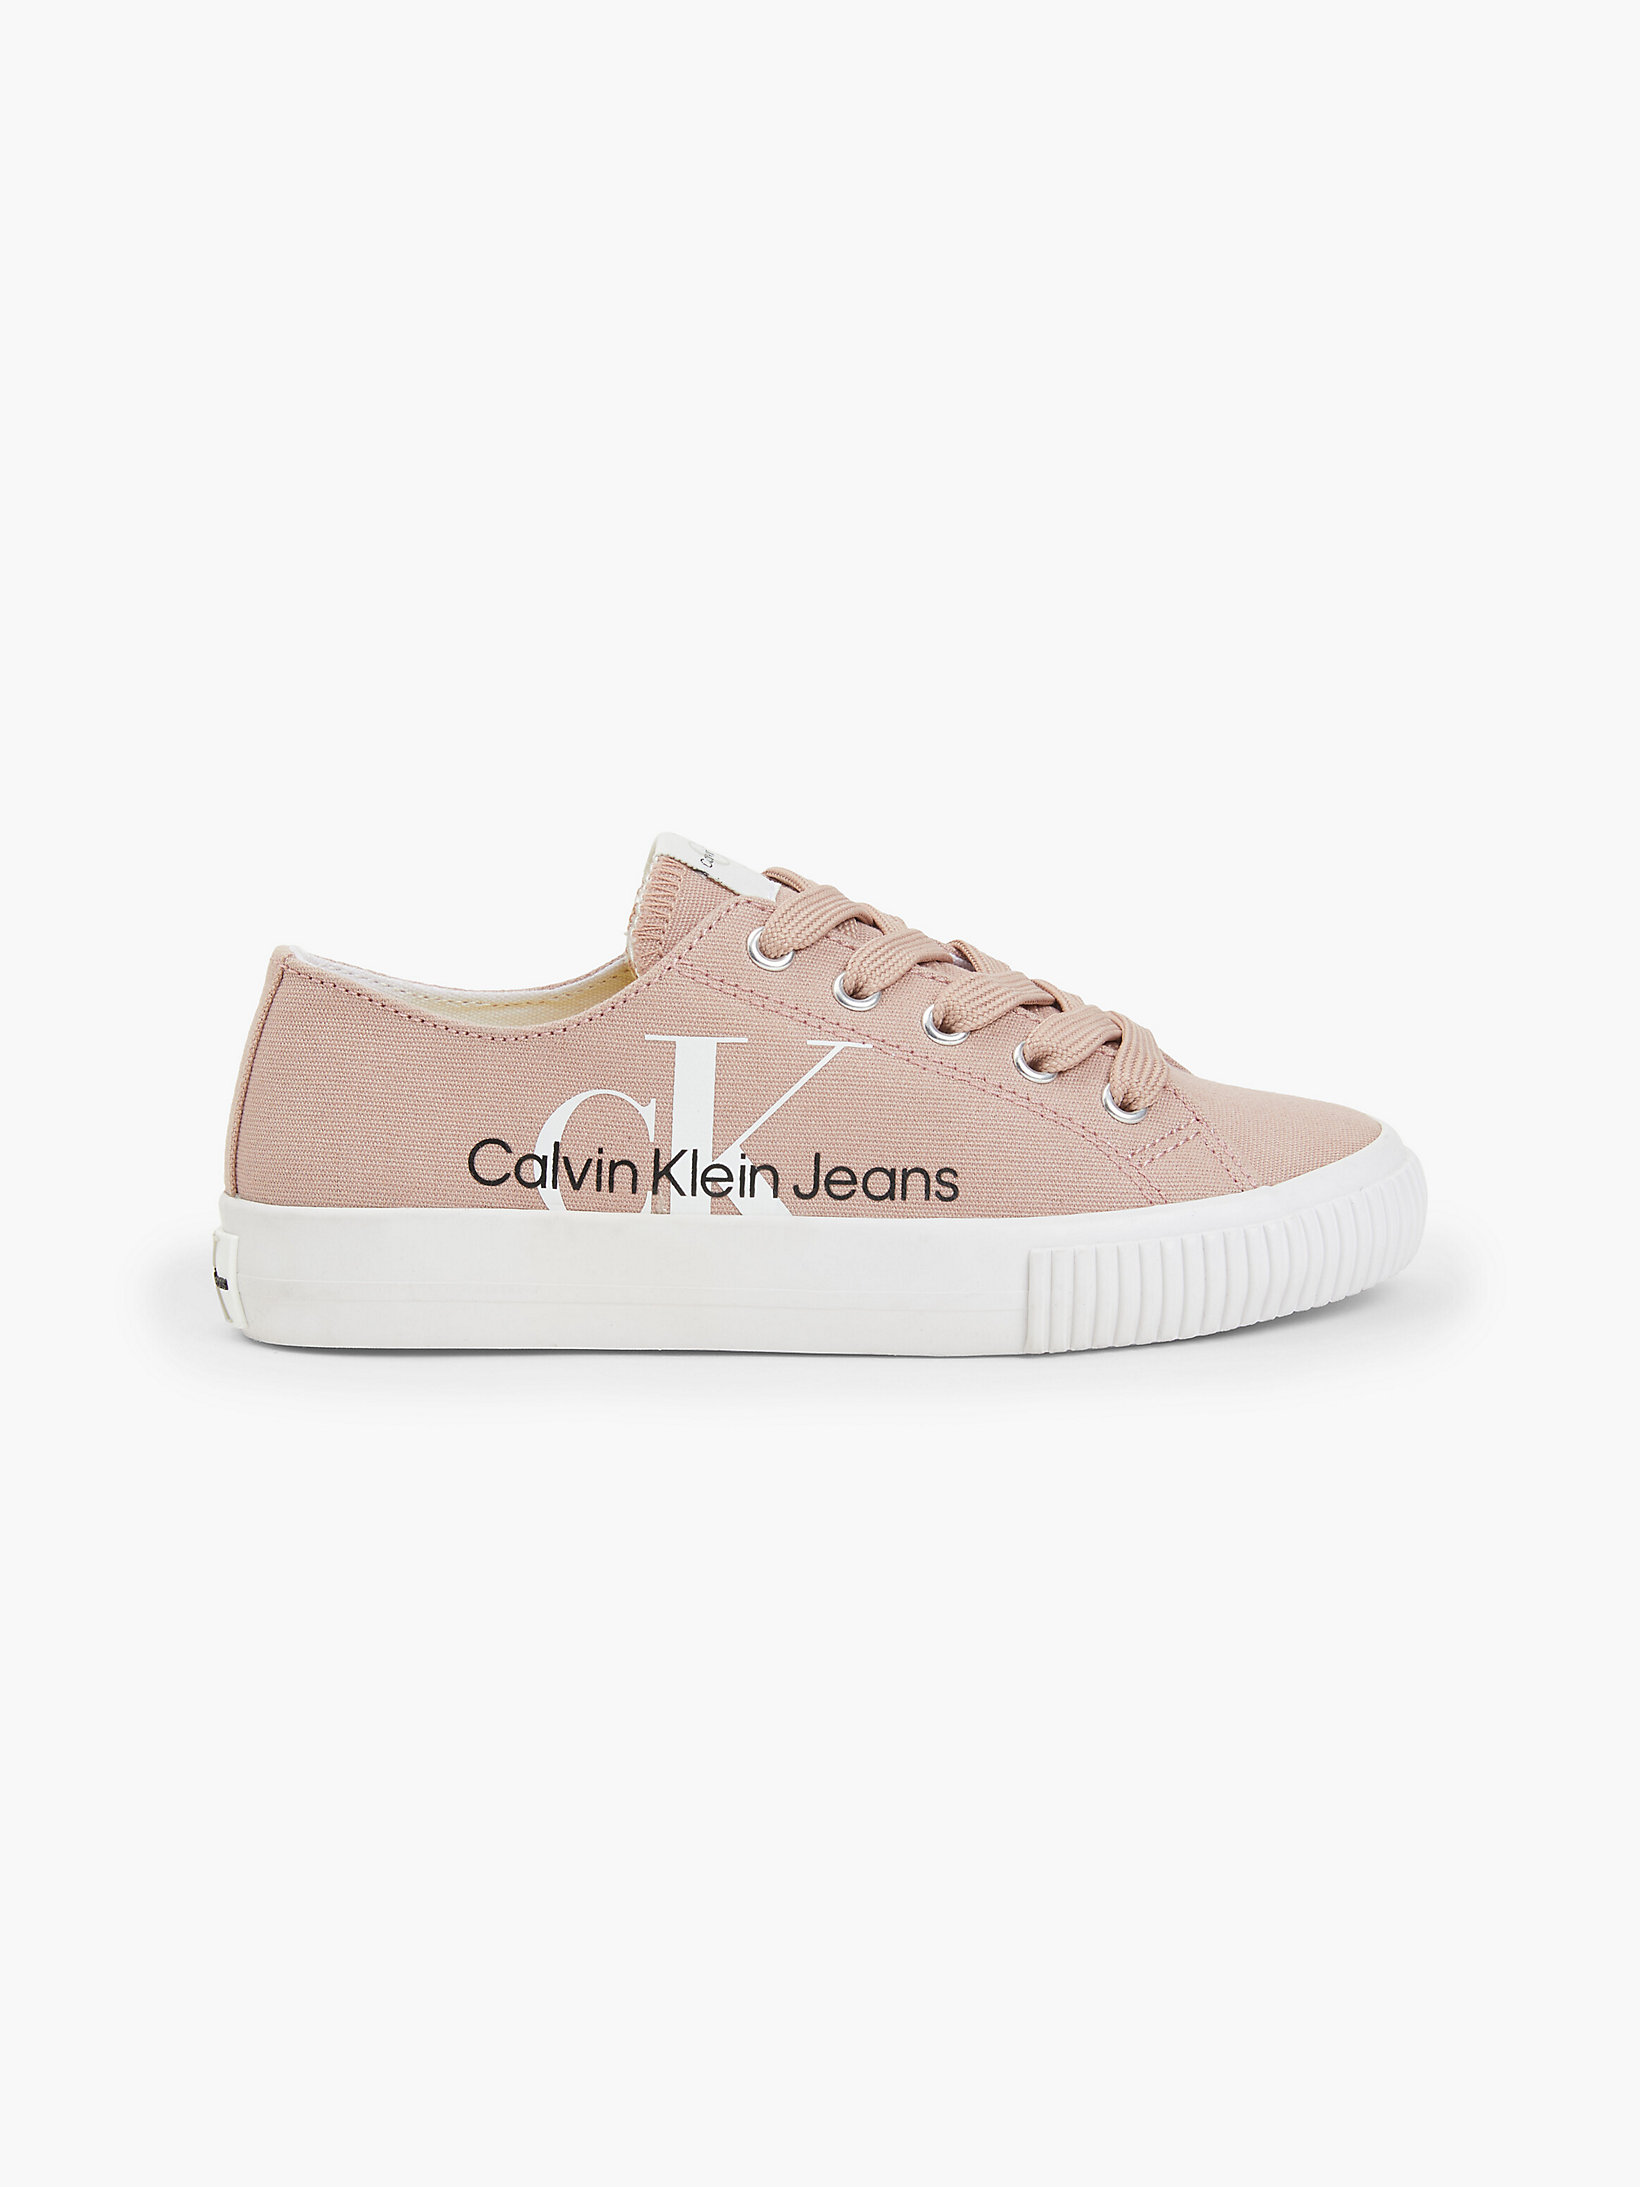 Antique Rose Recycled Canvas Trainers undefined girls Calvin Klein